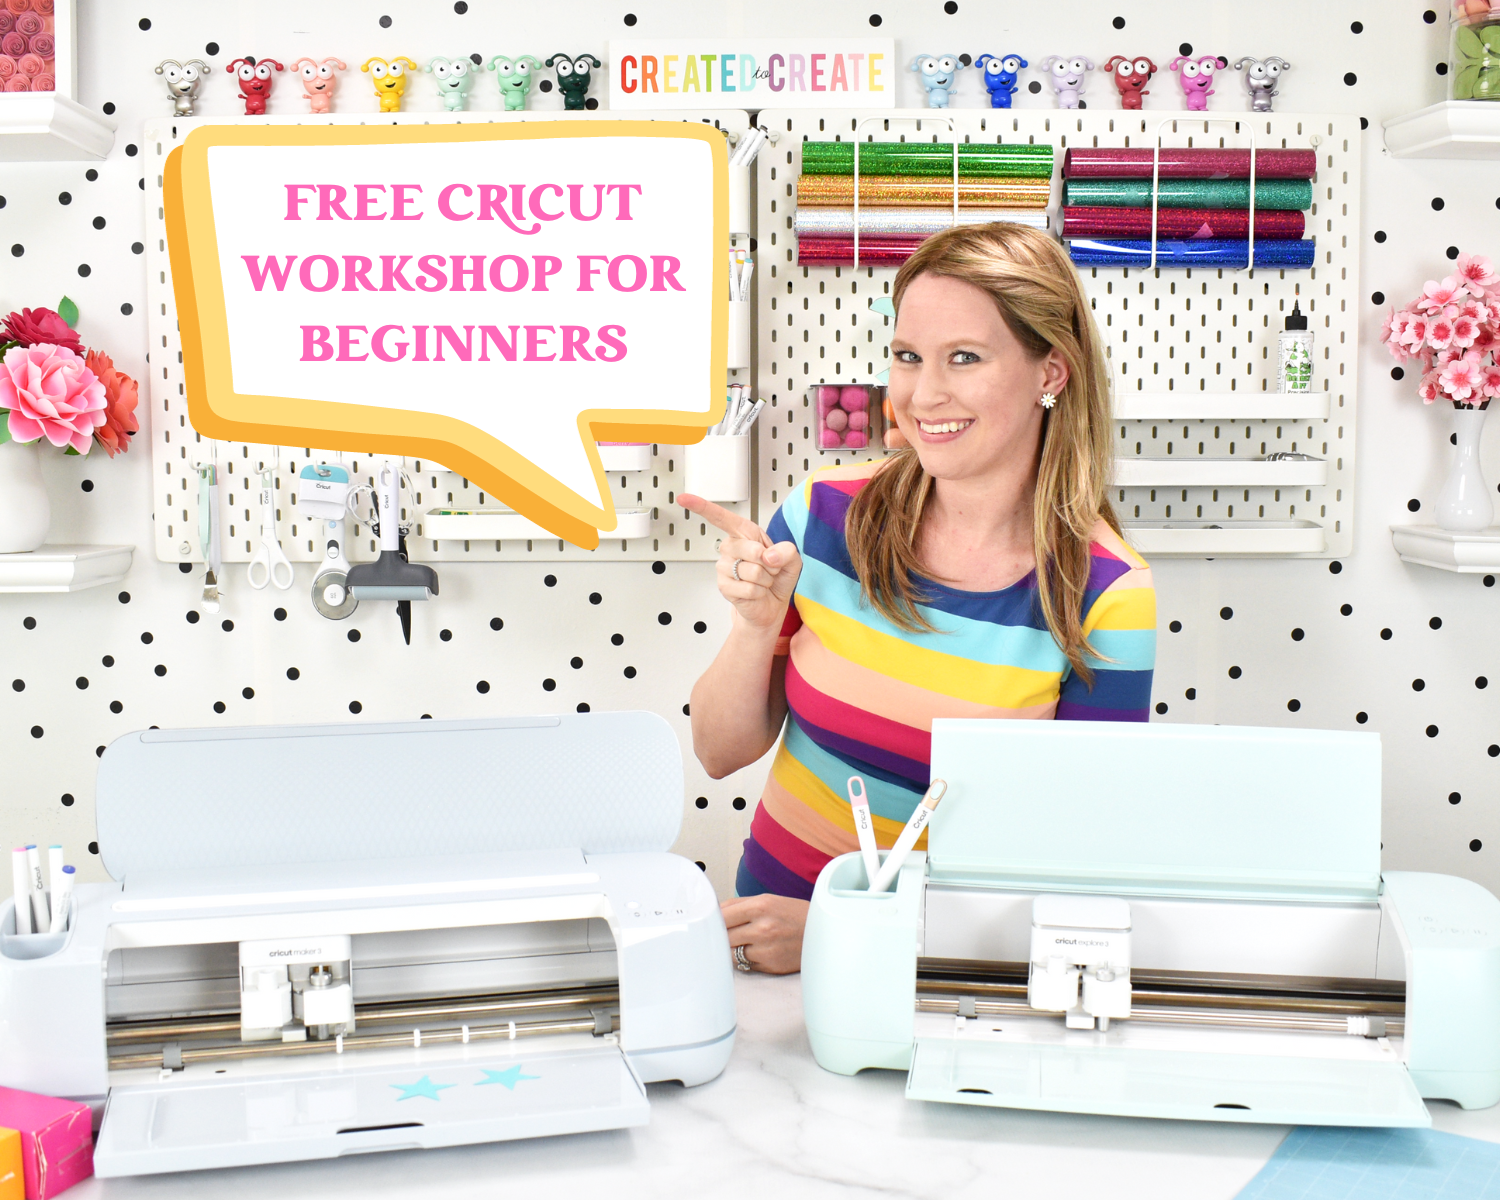 How To Use Cricut: Ultimate Guide To Cricut For Beginners